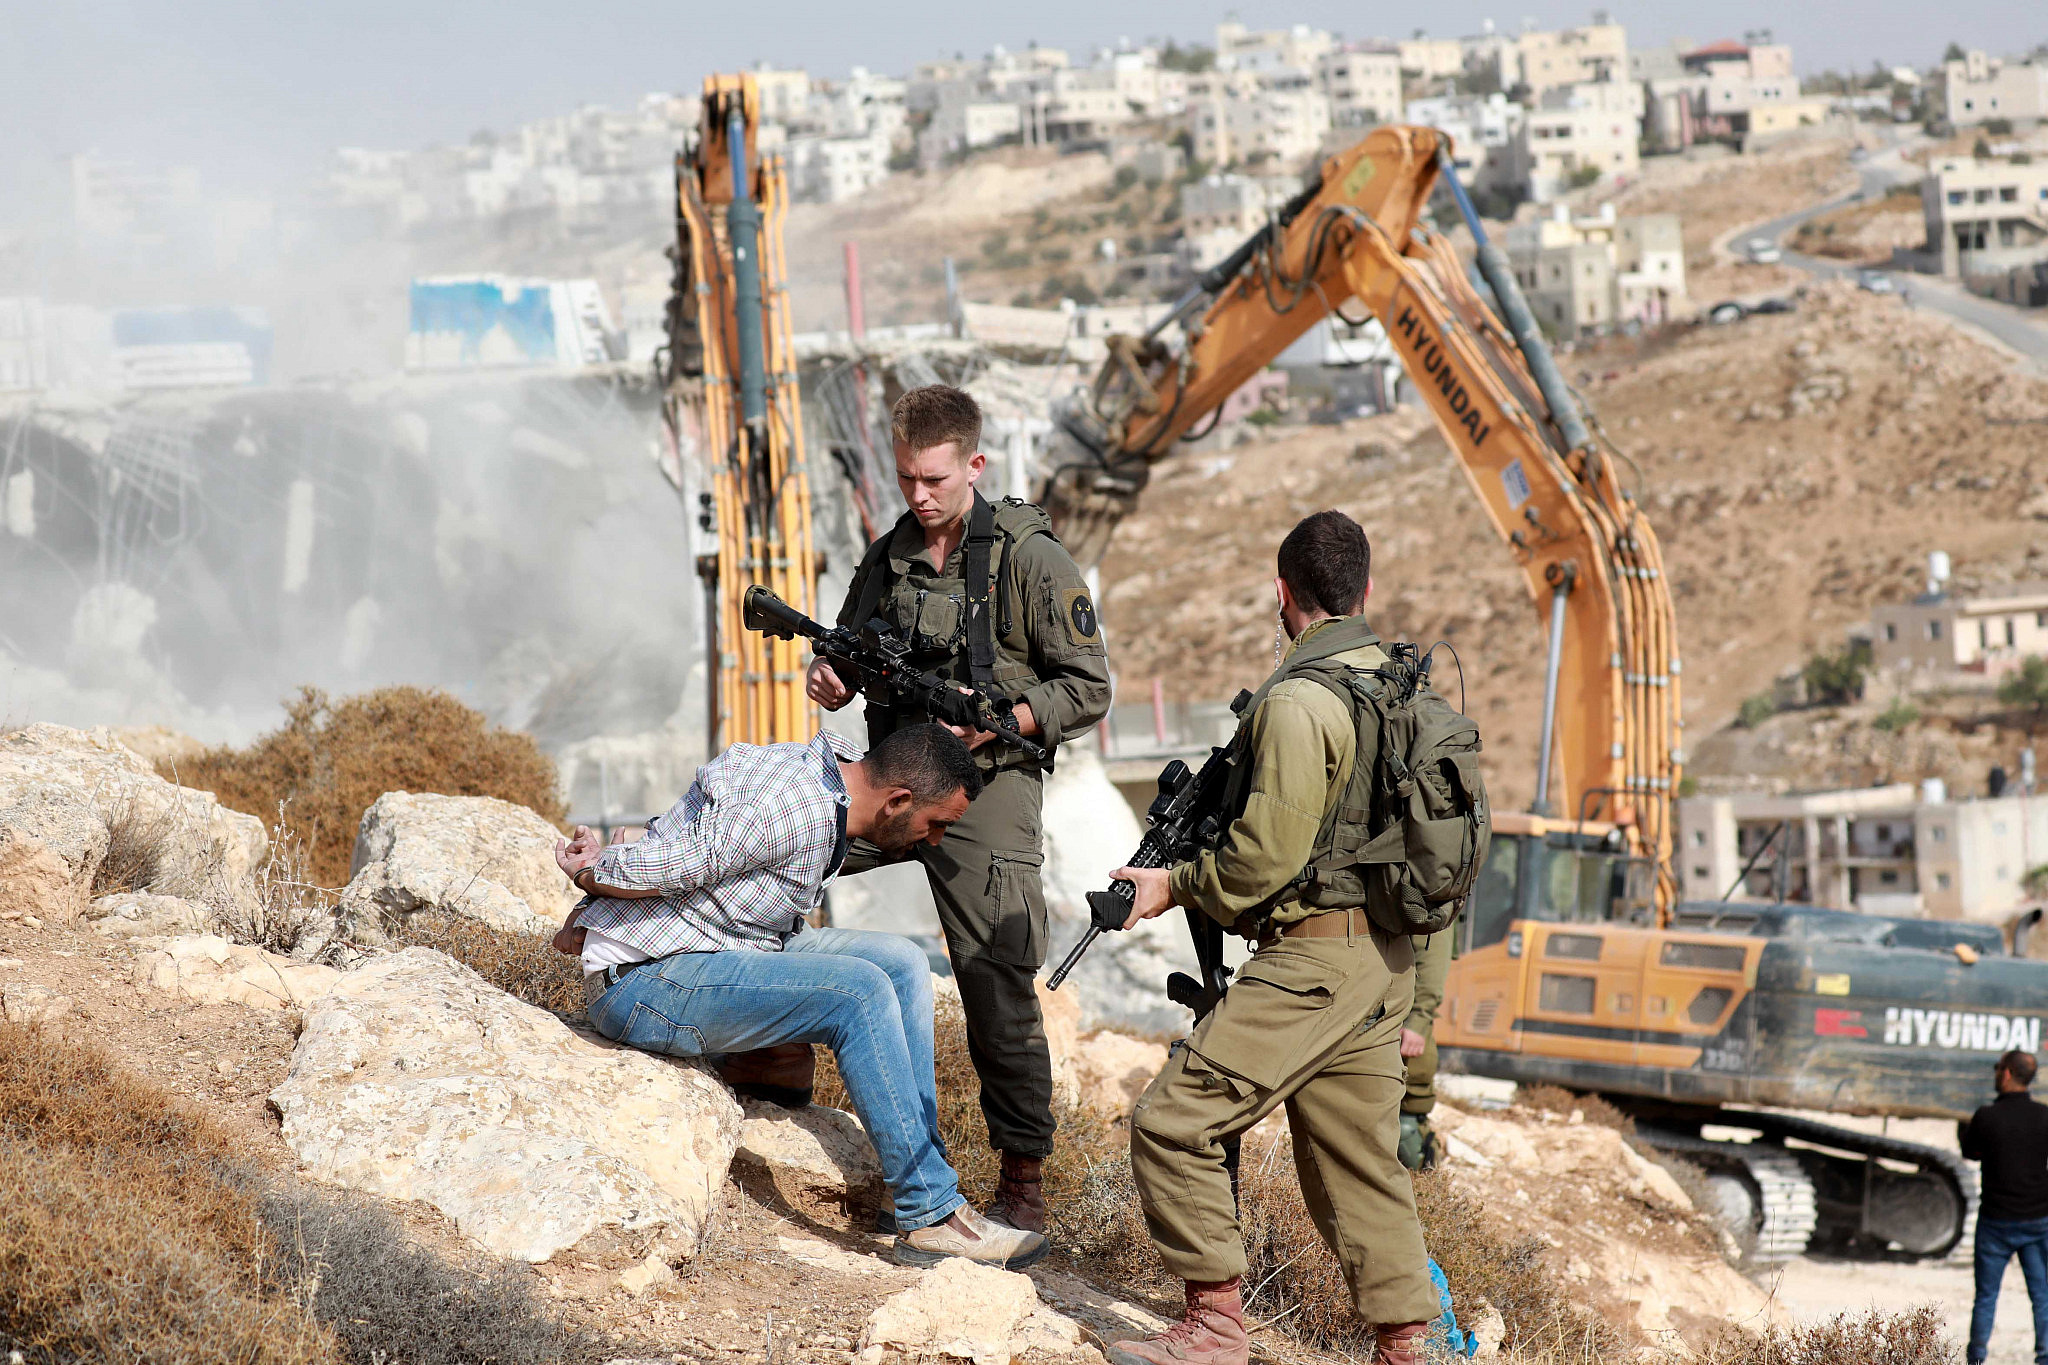 Palestinians clash with Israeli security forces as Israeli bulldozer demolishes a Palestinian house in the West Bank city of Hebron, October 25, 2022. (Wisam Hashlamoun/Flash90)